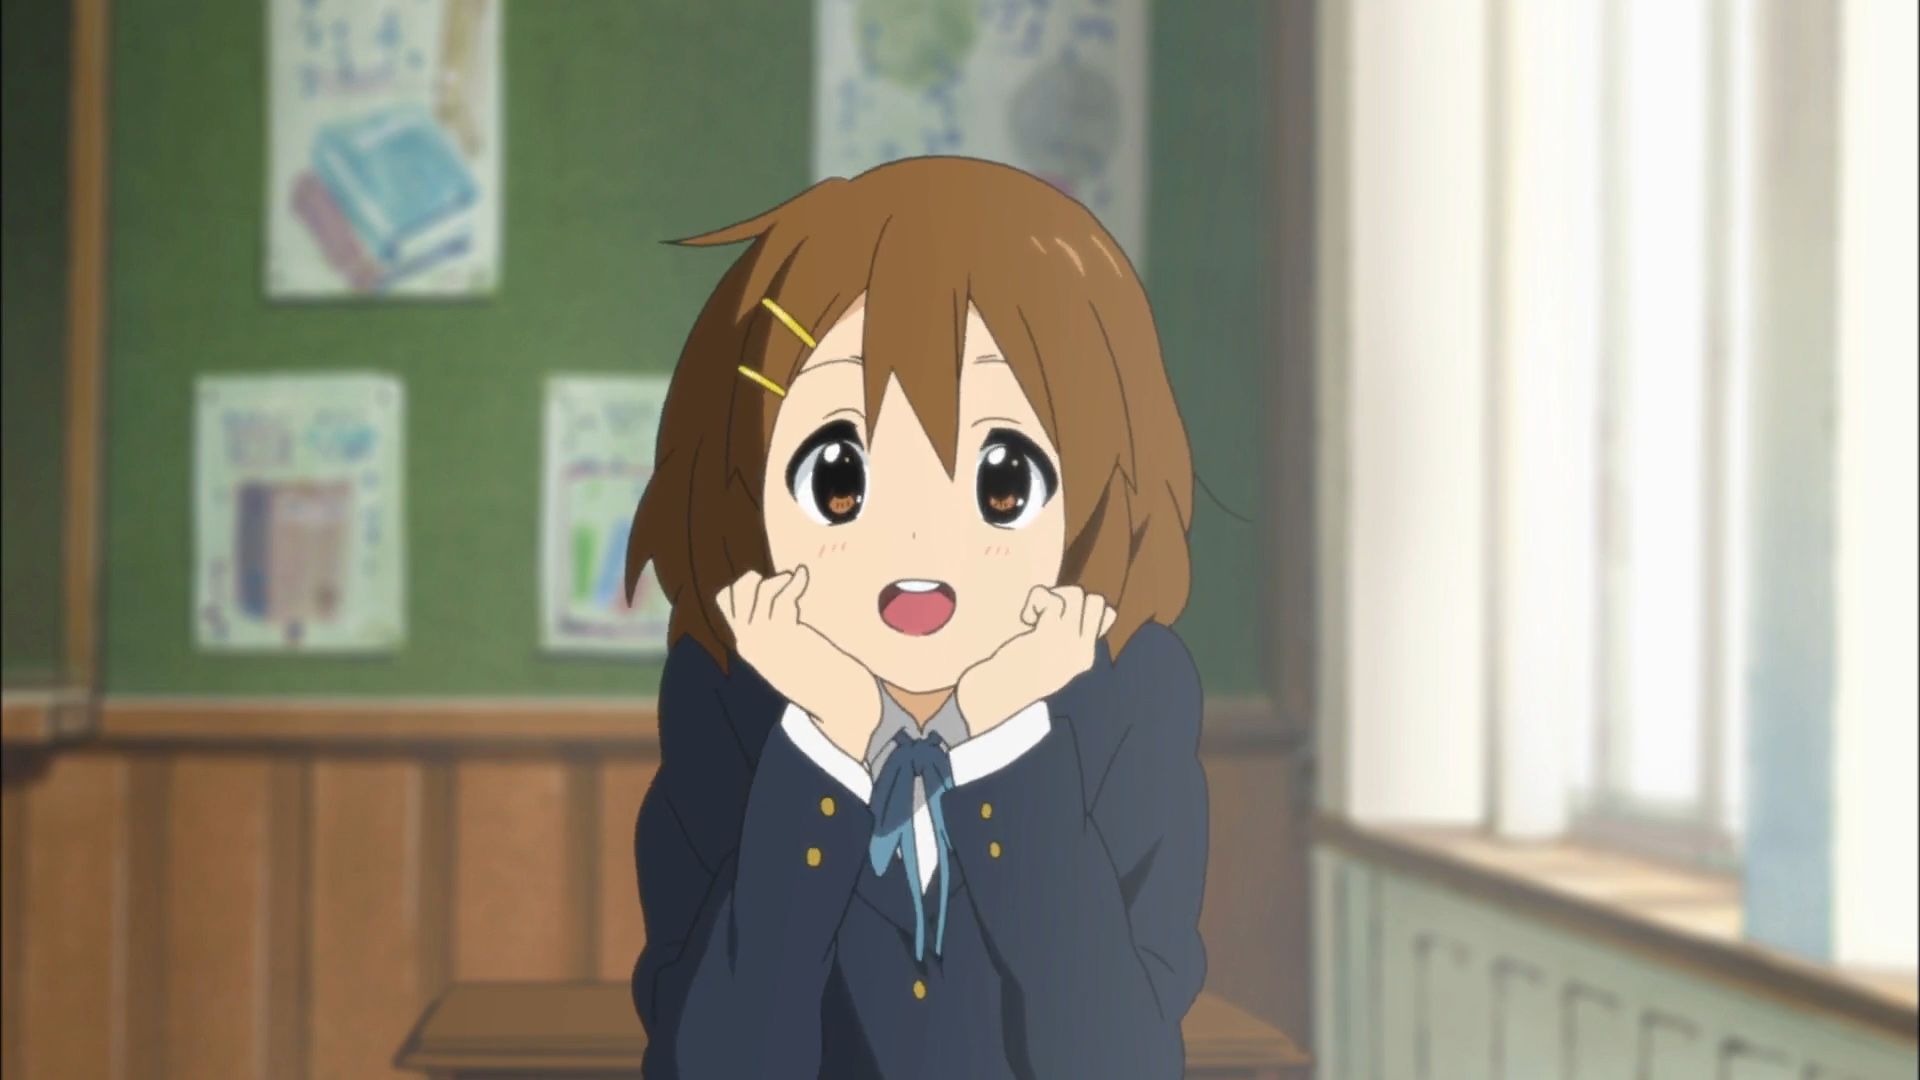 Yui Hirasawa from K-On! is one of the cute anime girls.